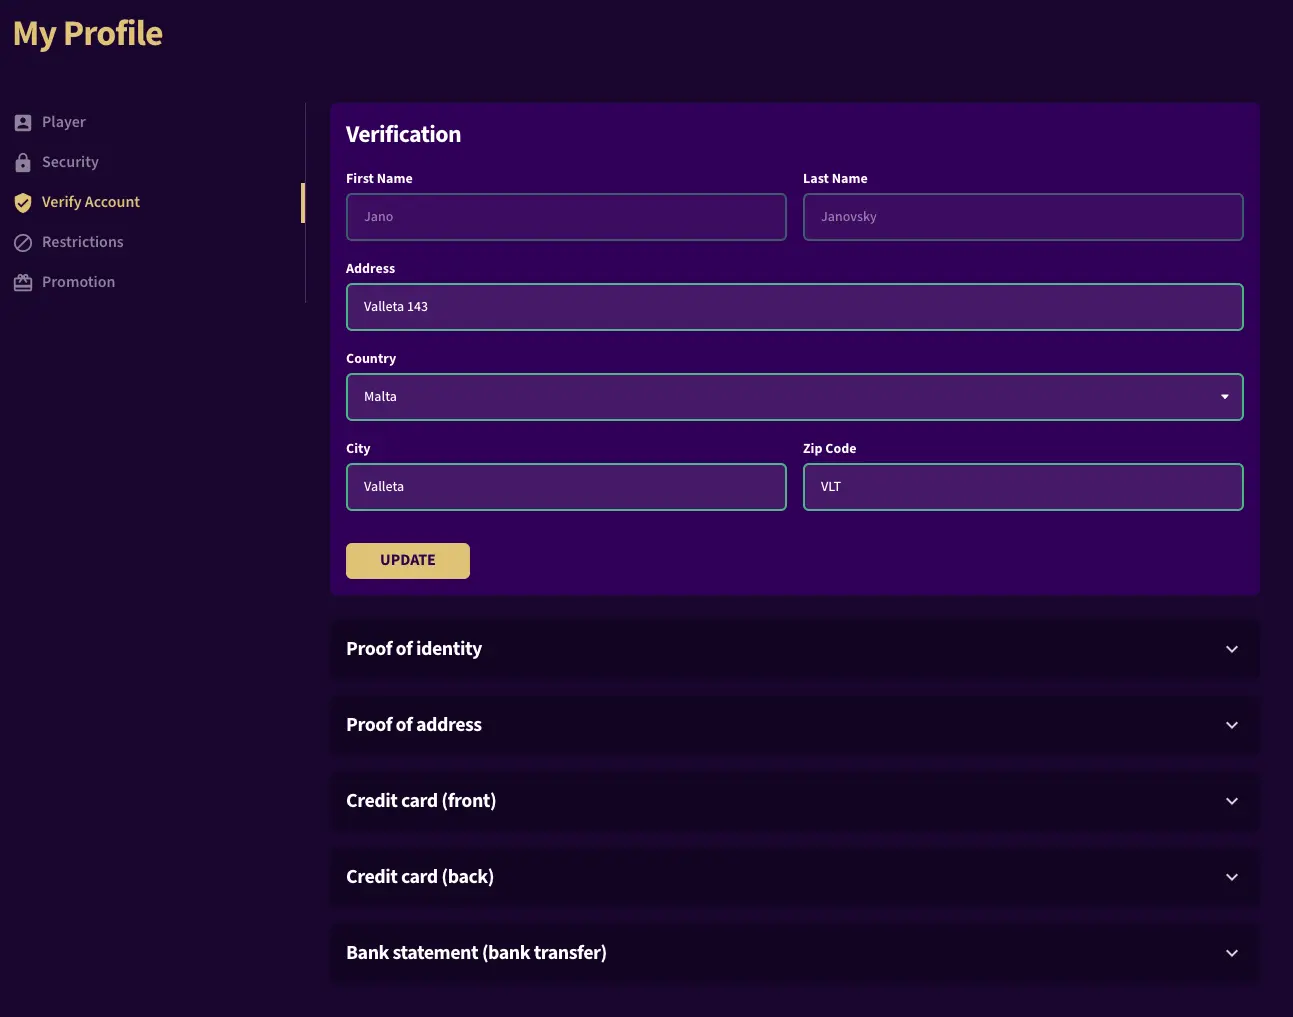 Haz Casino new account verification, so you can withdraw your funds without problems.